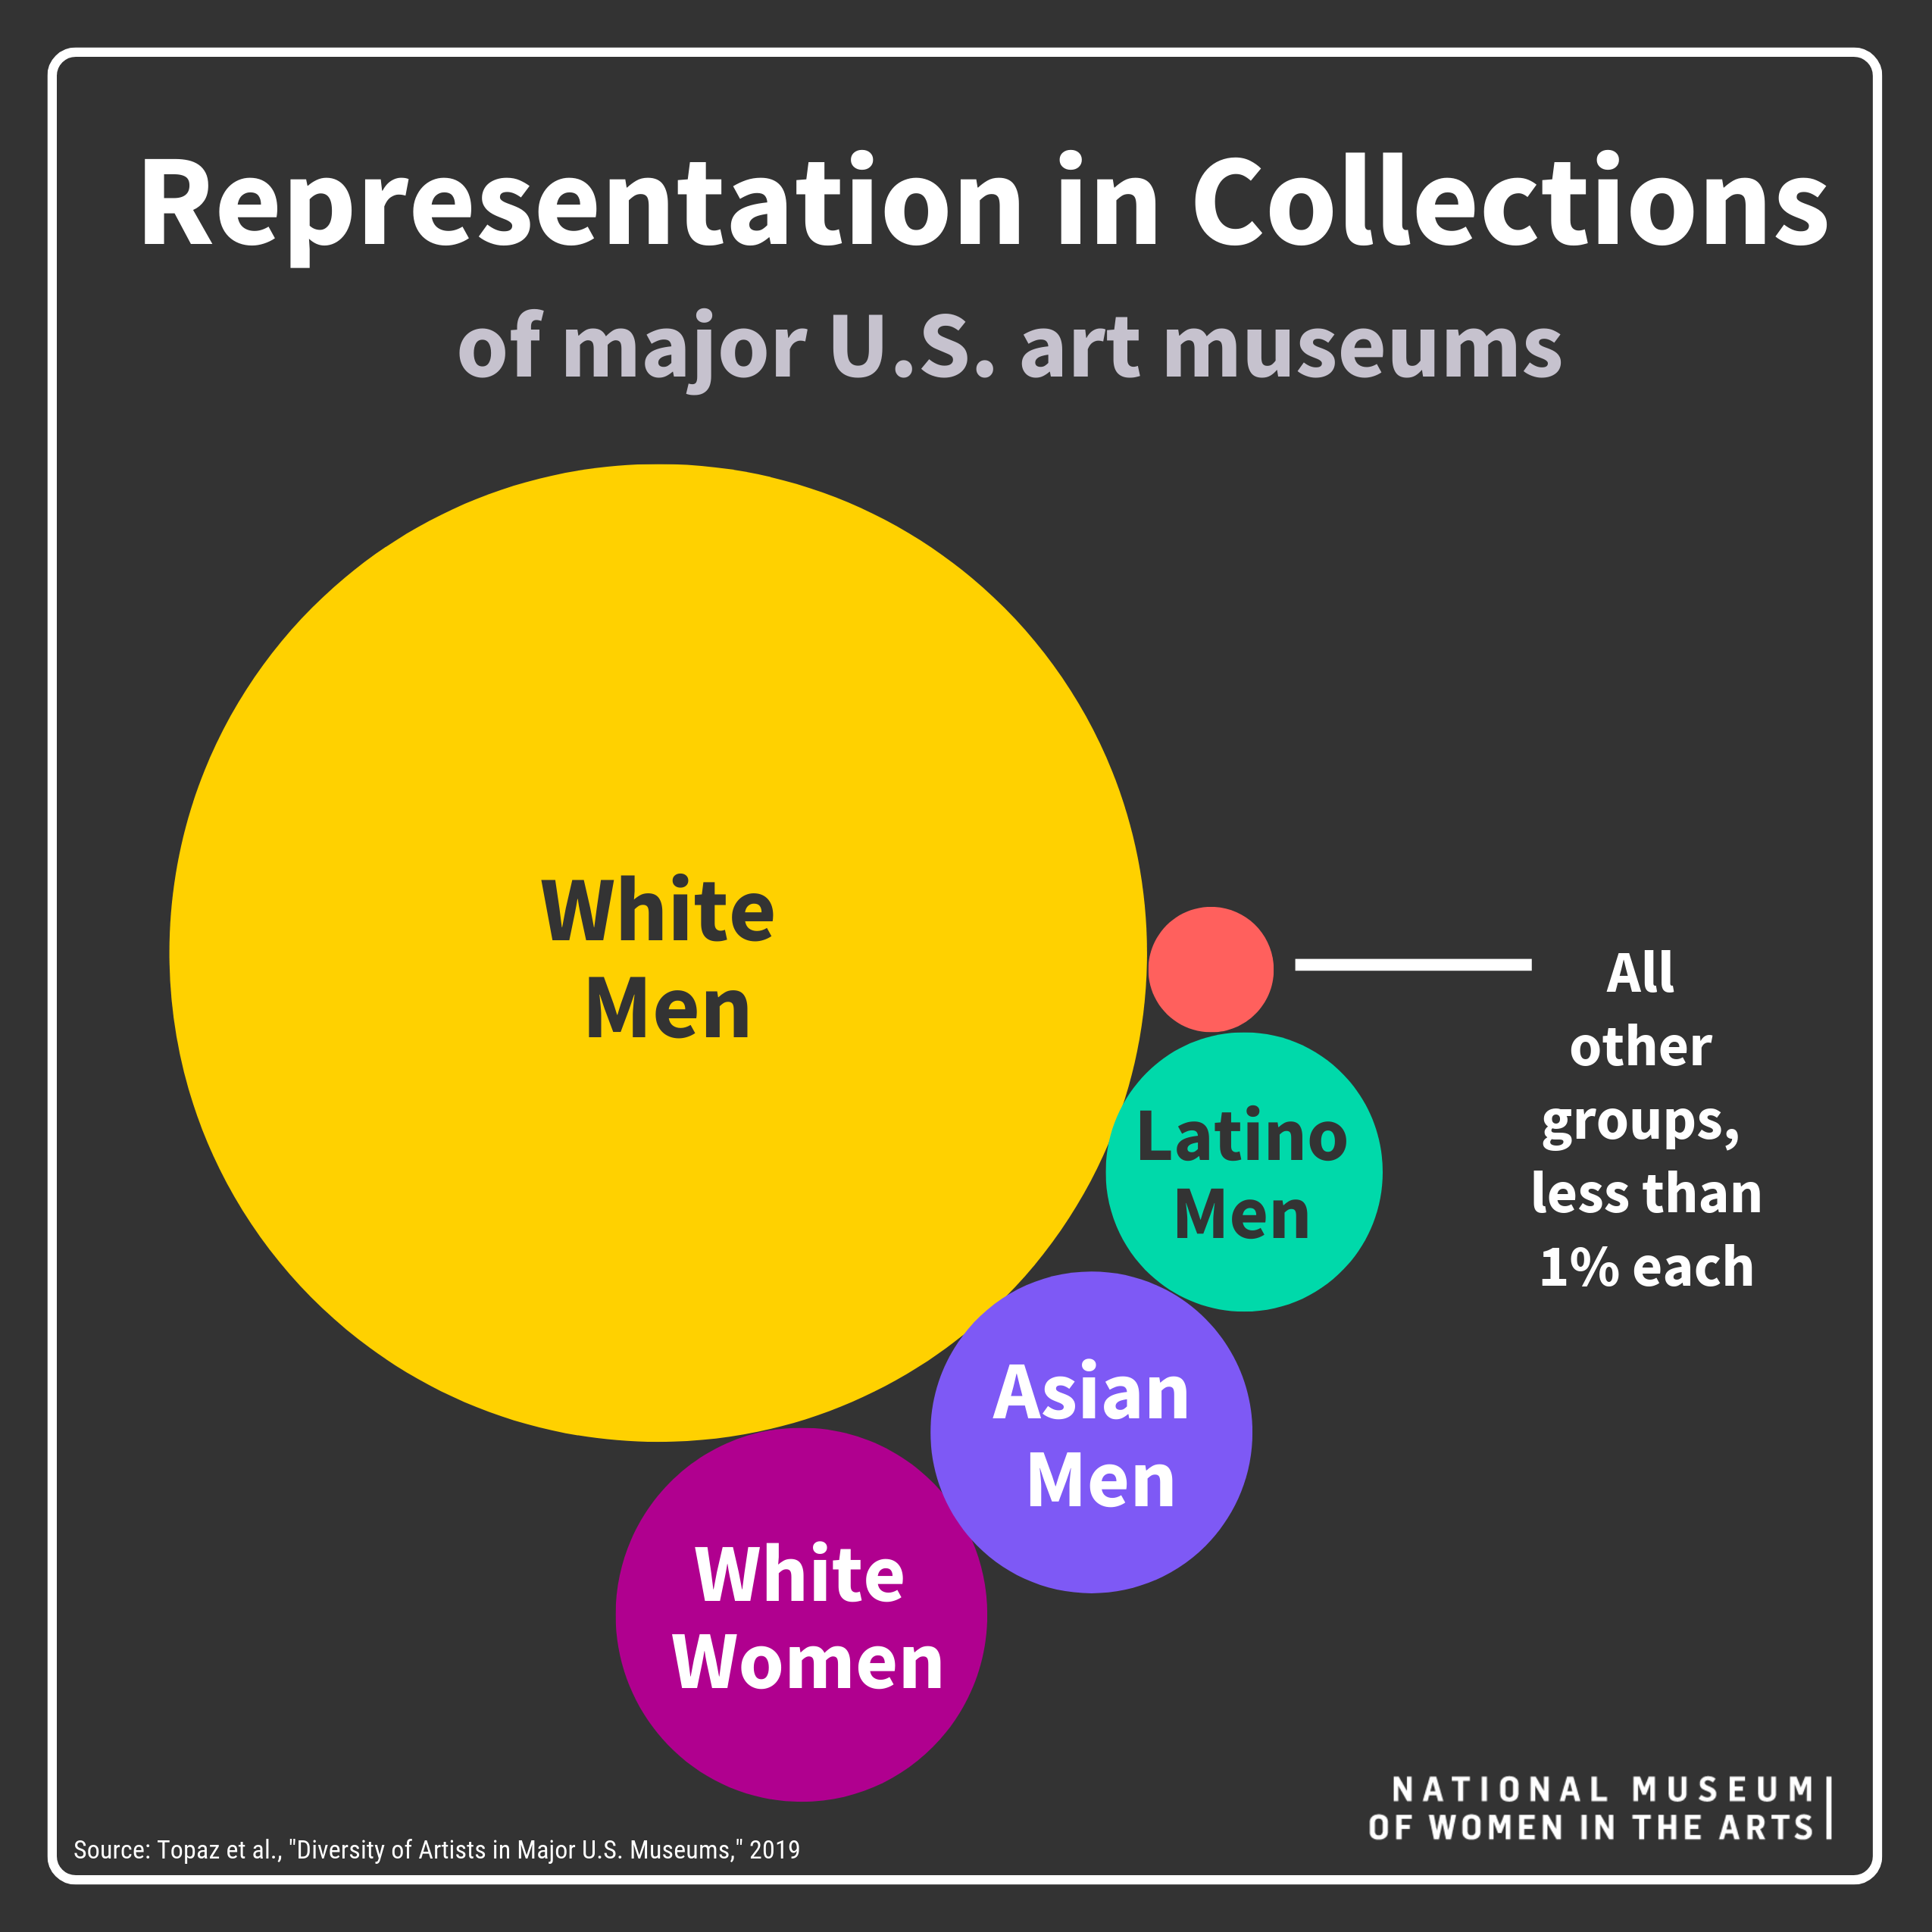 Image showing representation gap in art between white men and all other groups